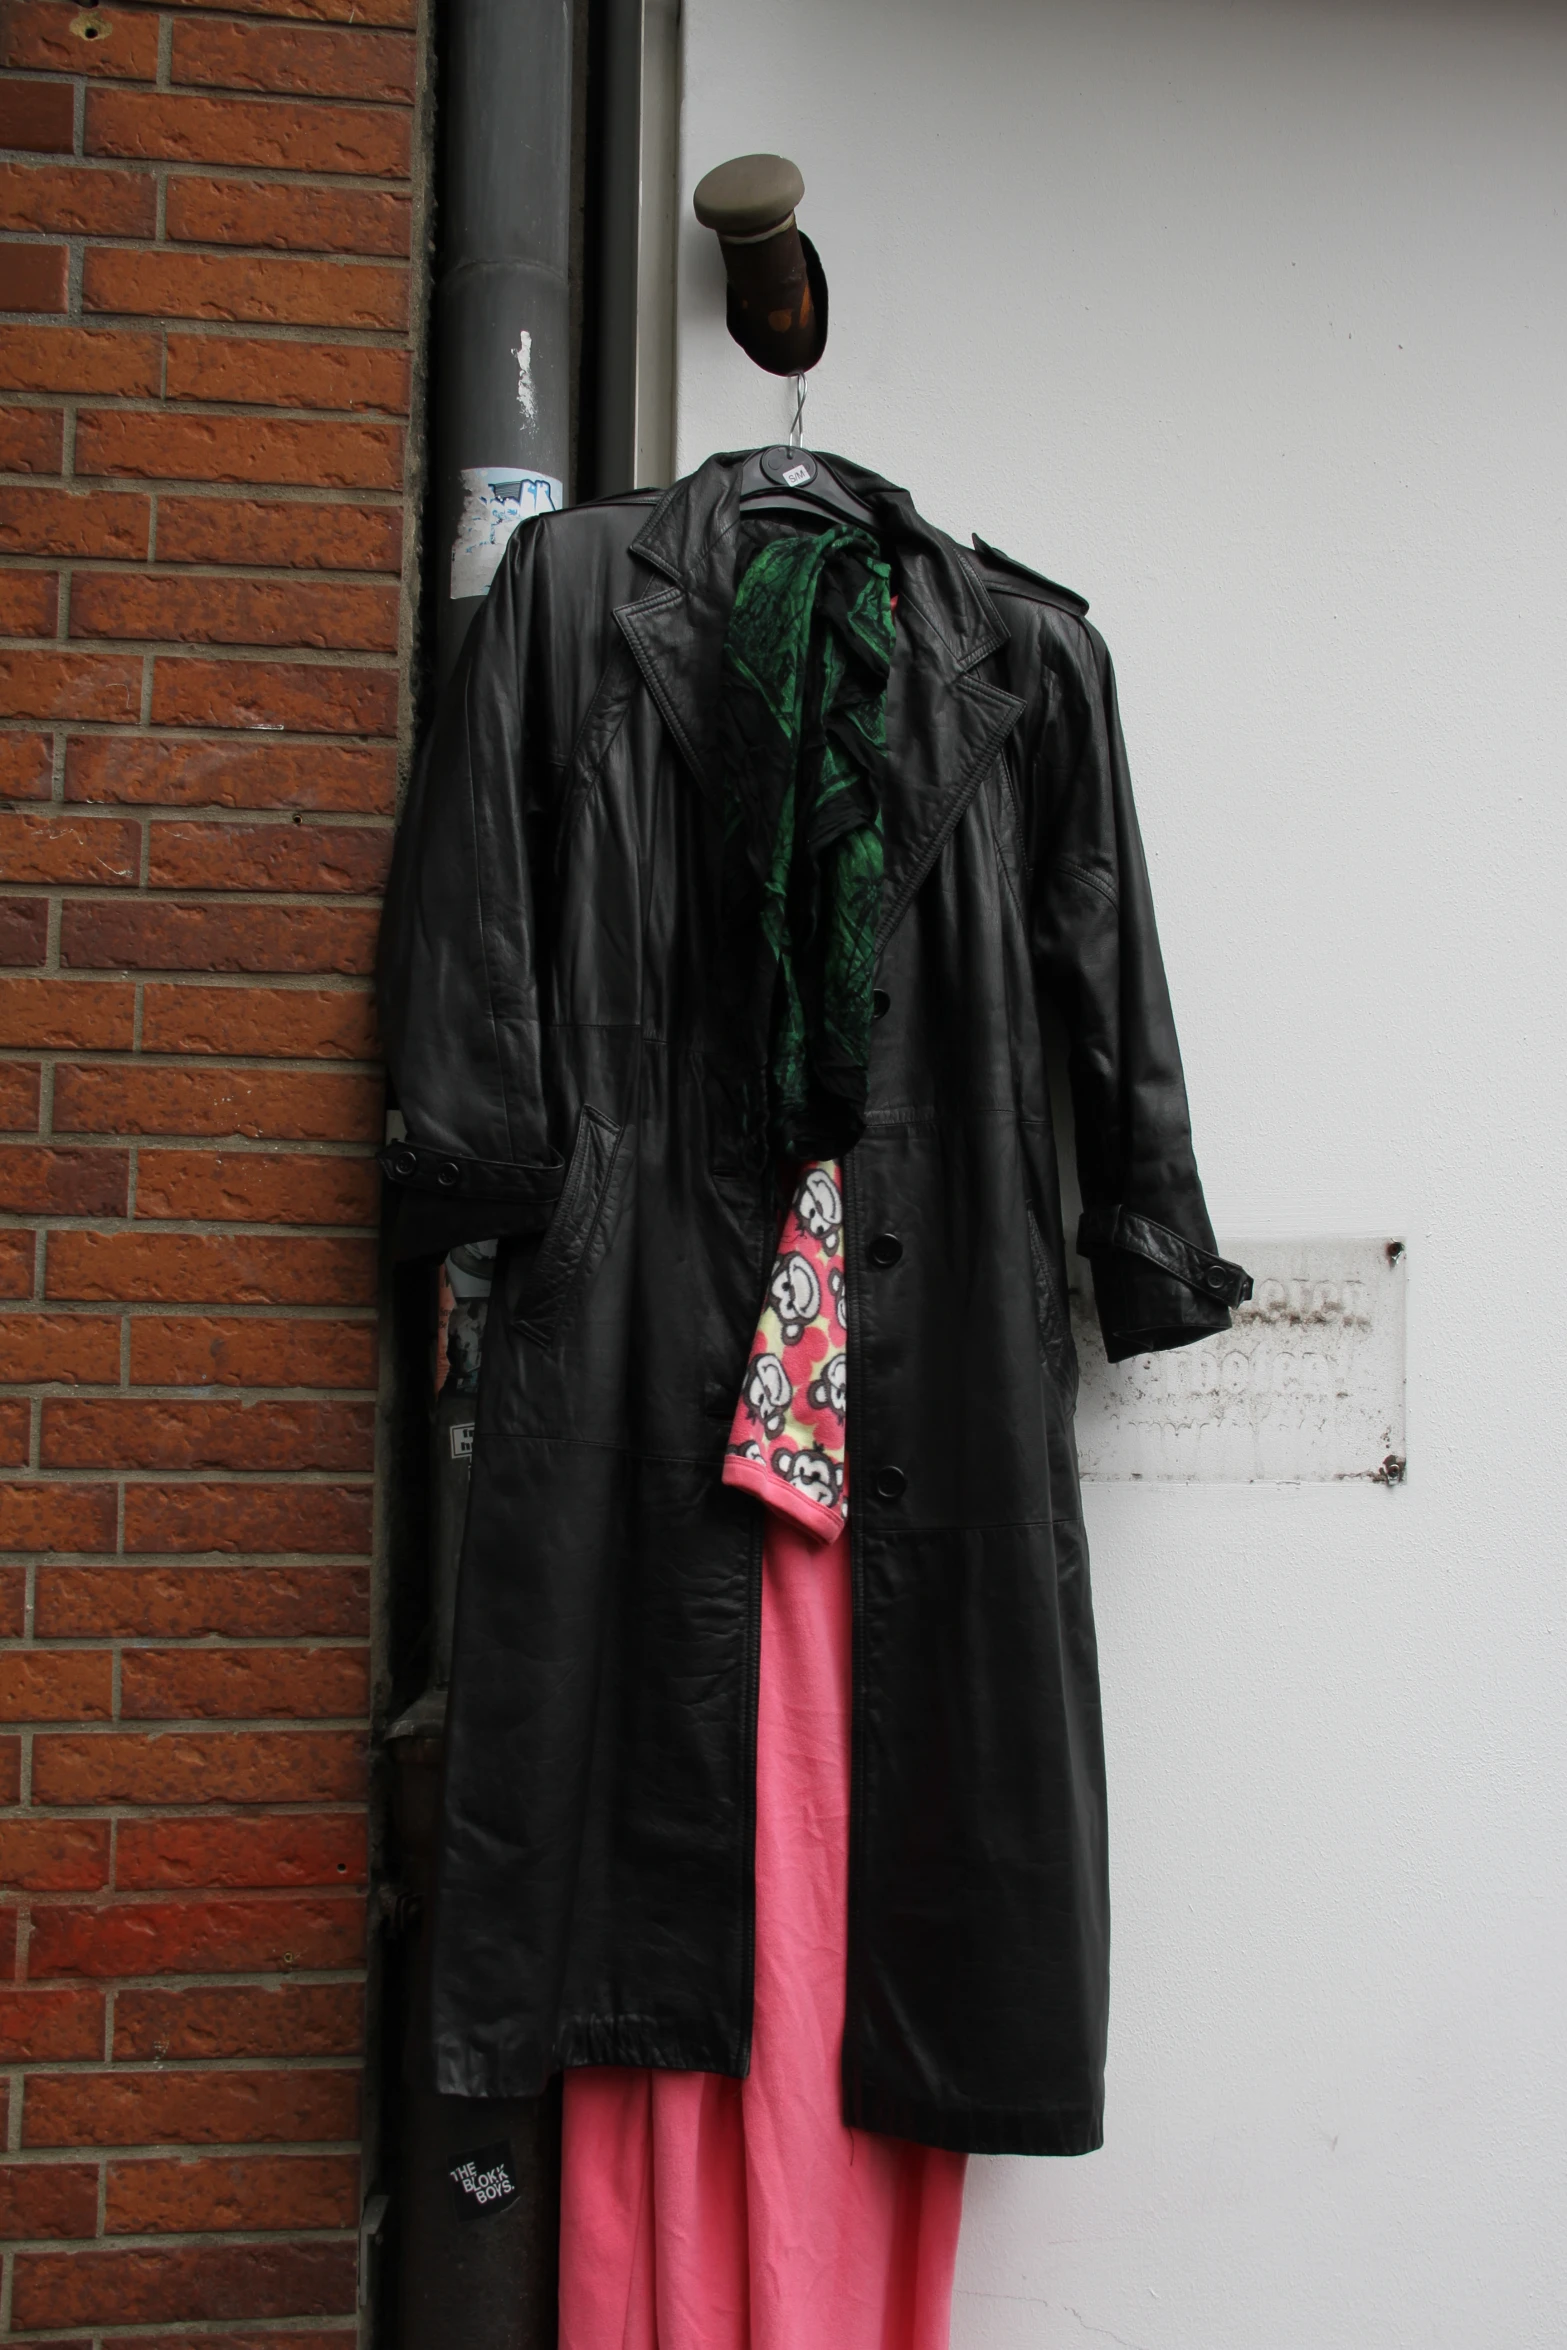 a black jacket is hanging on a pole